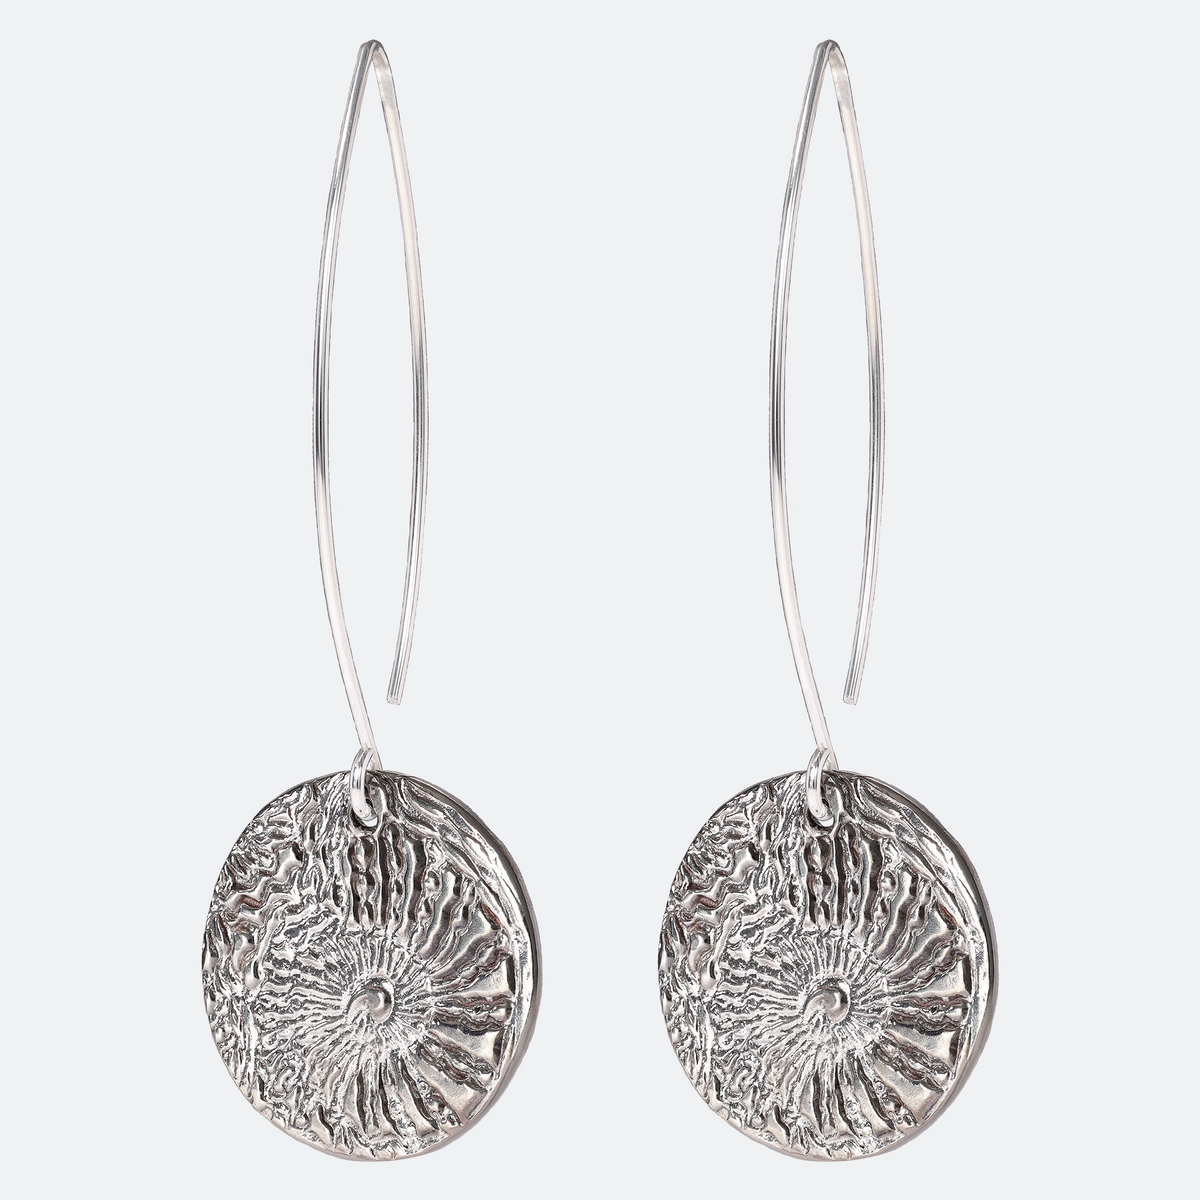 Nautilus Textured Large Sterling Silver Earrings on Long Ear Wires